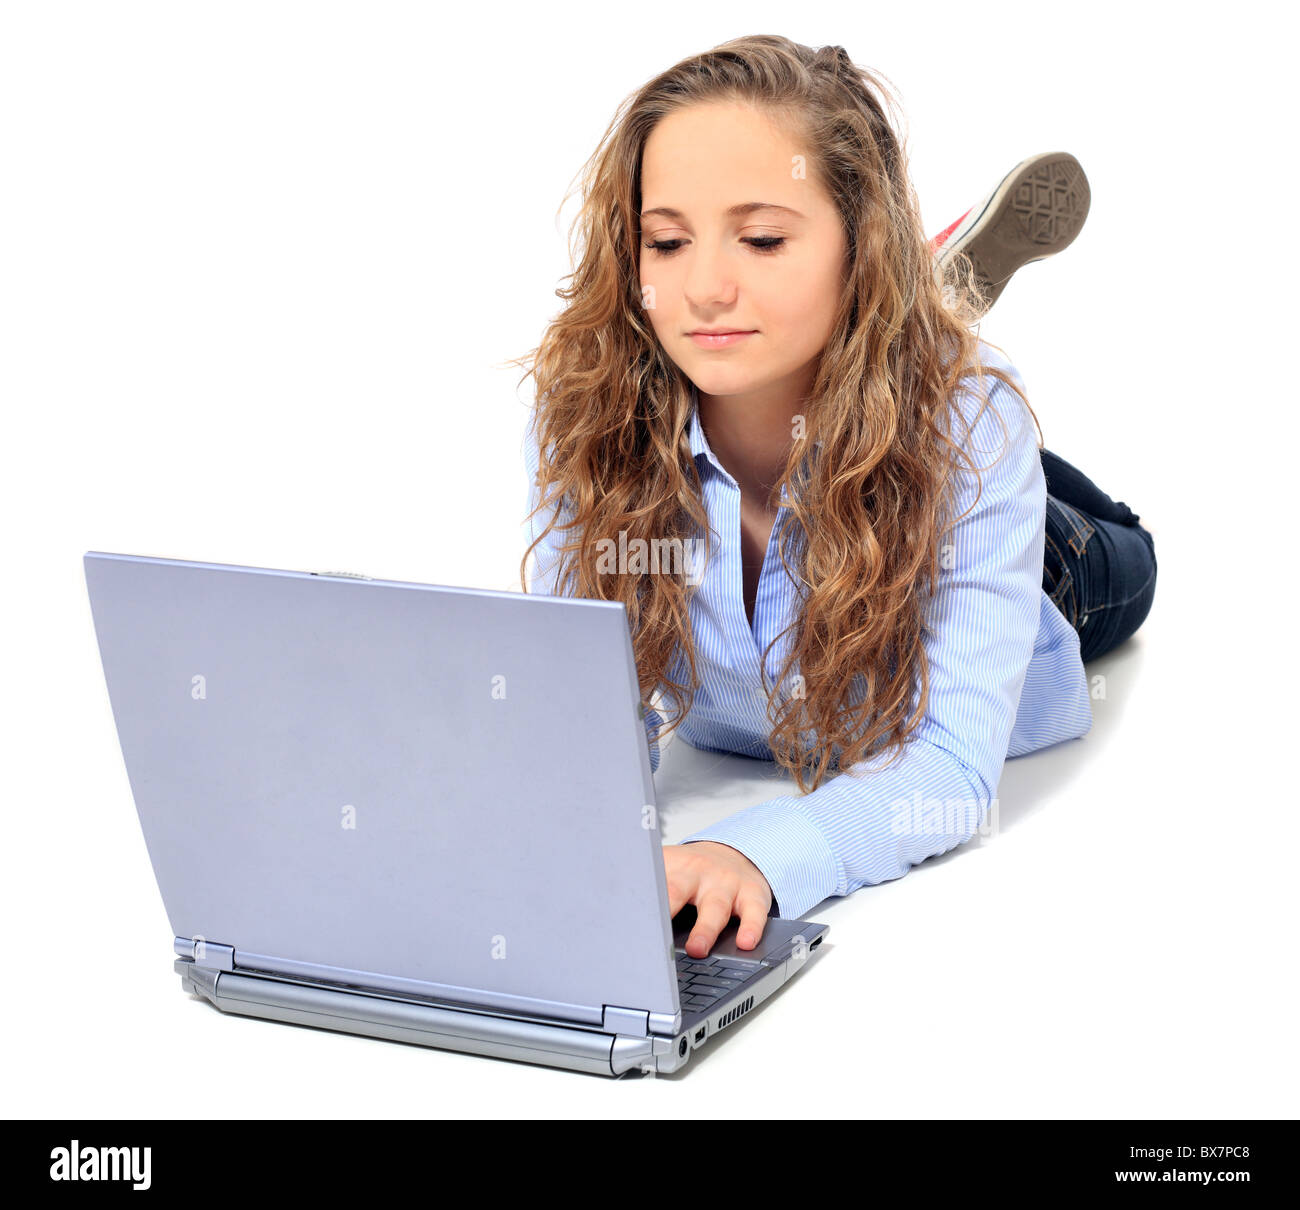 Attractive young girl lying on floor using notebook computer. All on white background. Stock Photo